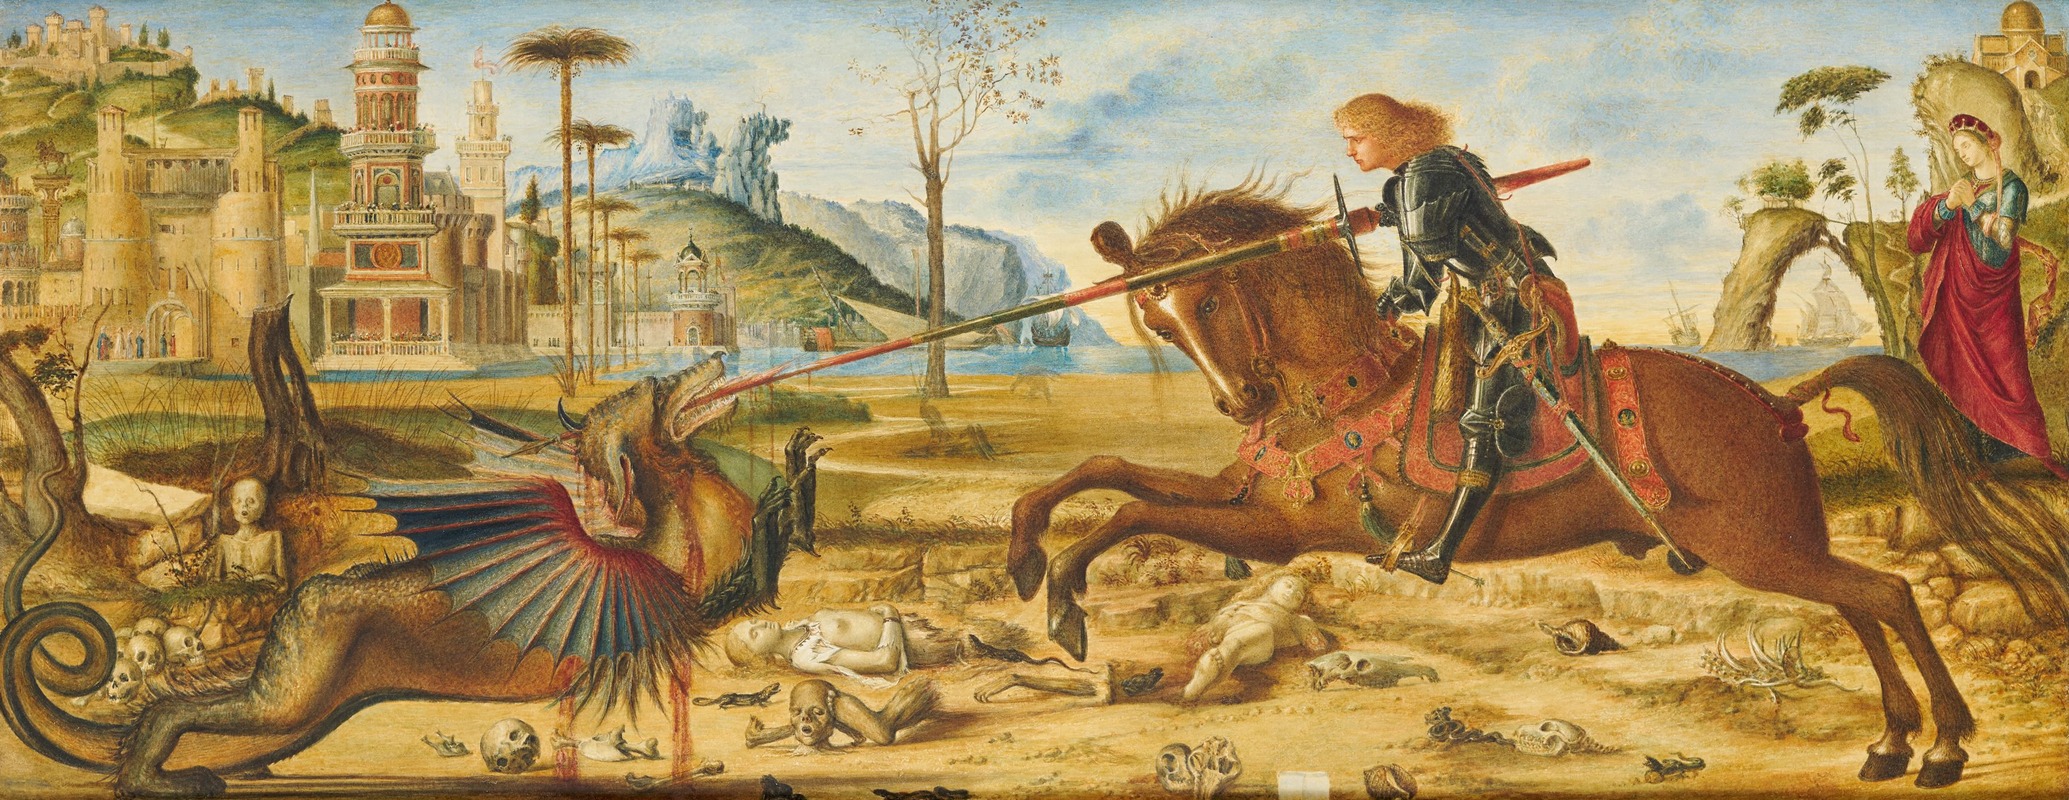 Charles Fairfax Murray - St George And The Dragon